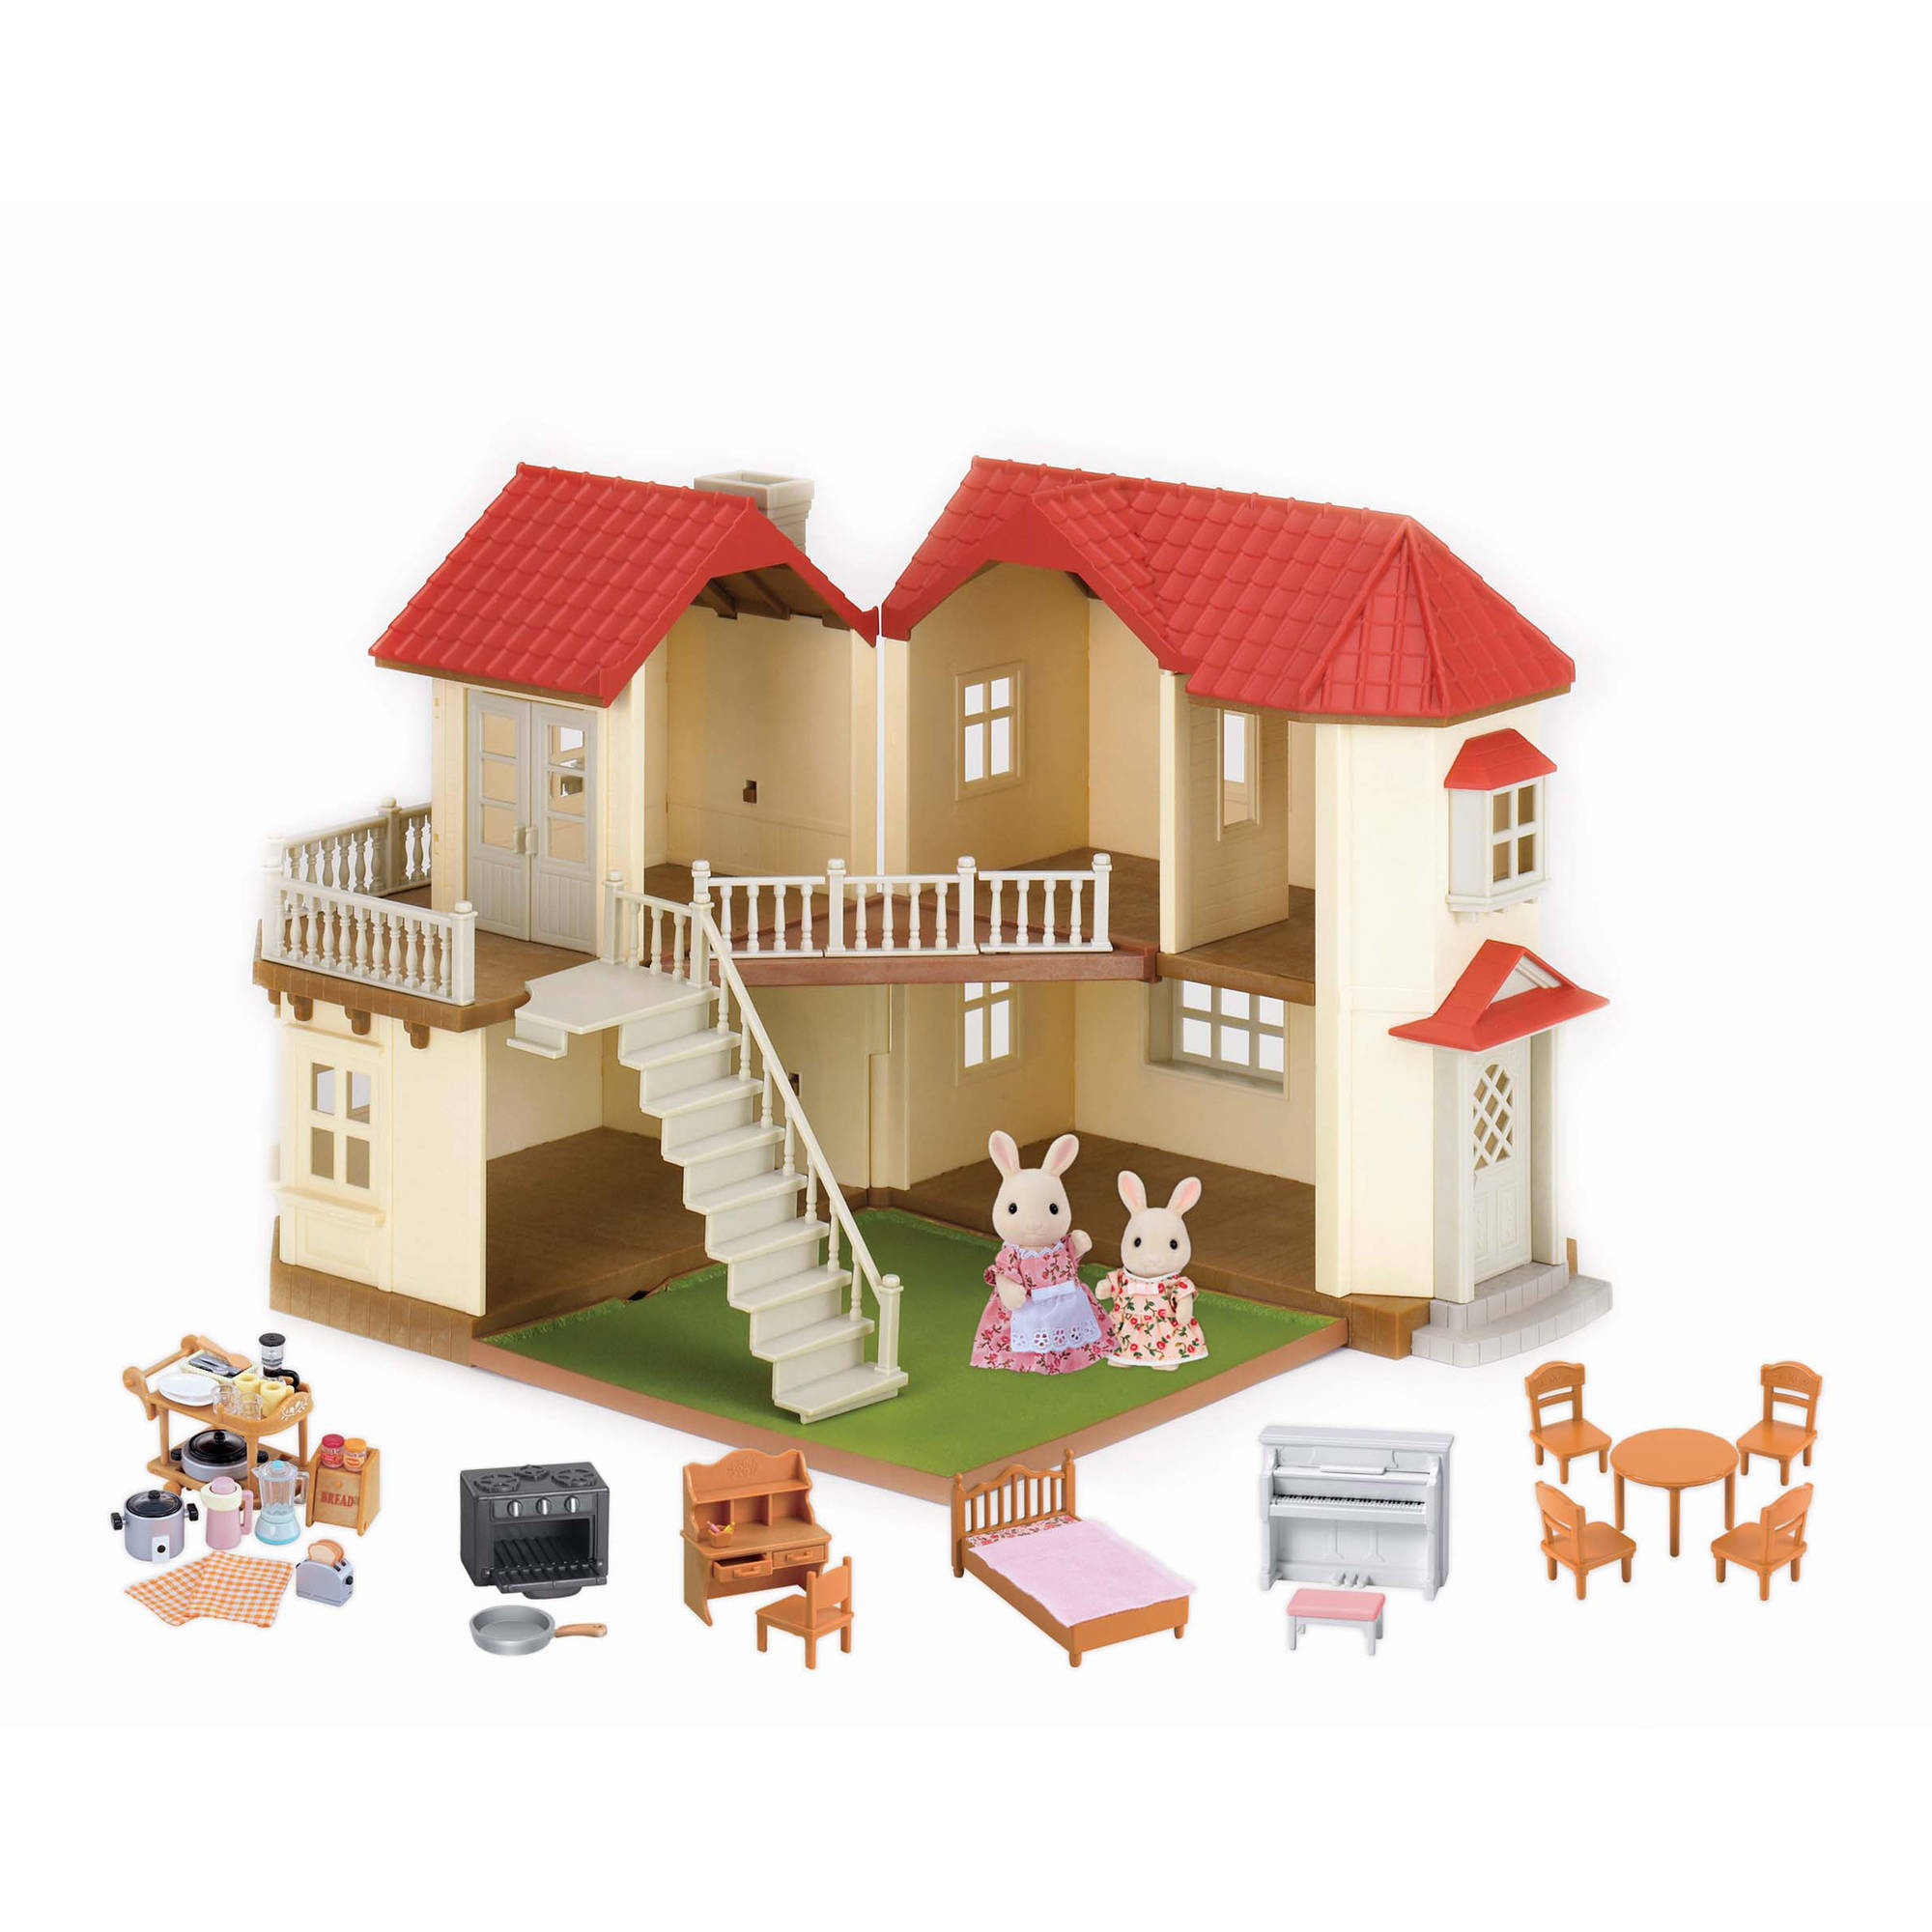 Calico Critters Luxury Townhome Gift Set - image 1 of 18